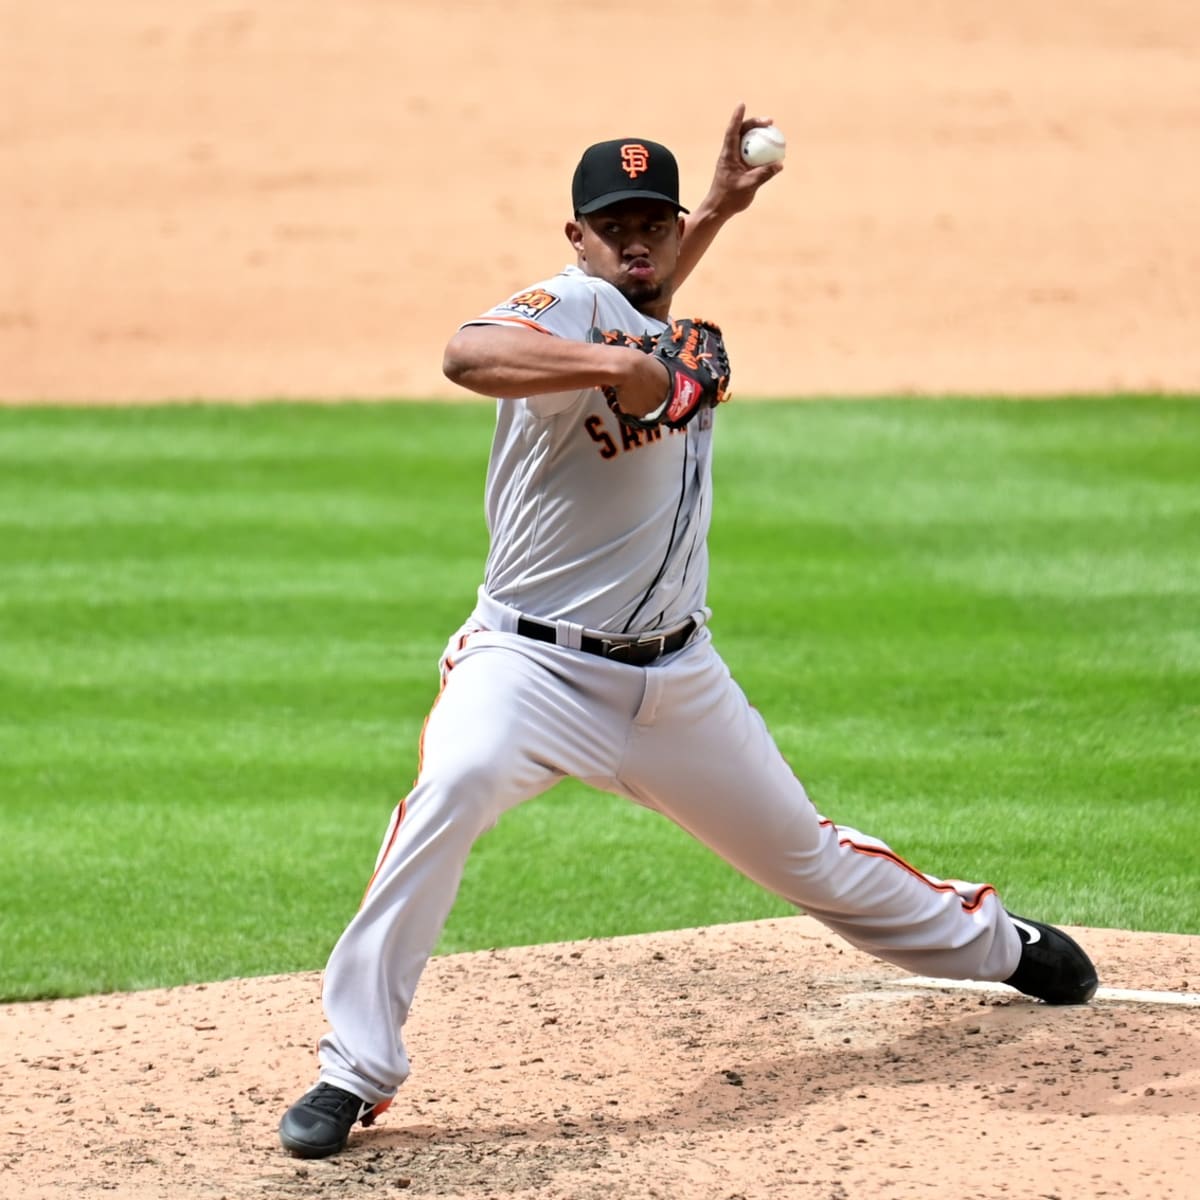 New York Yankees excited about acquiring reliever Wandy Peralta in